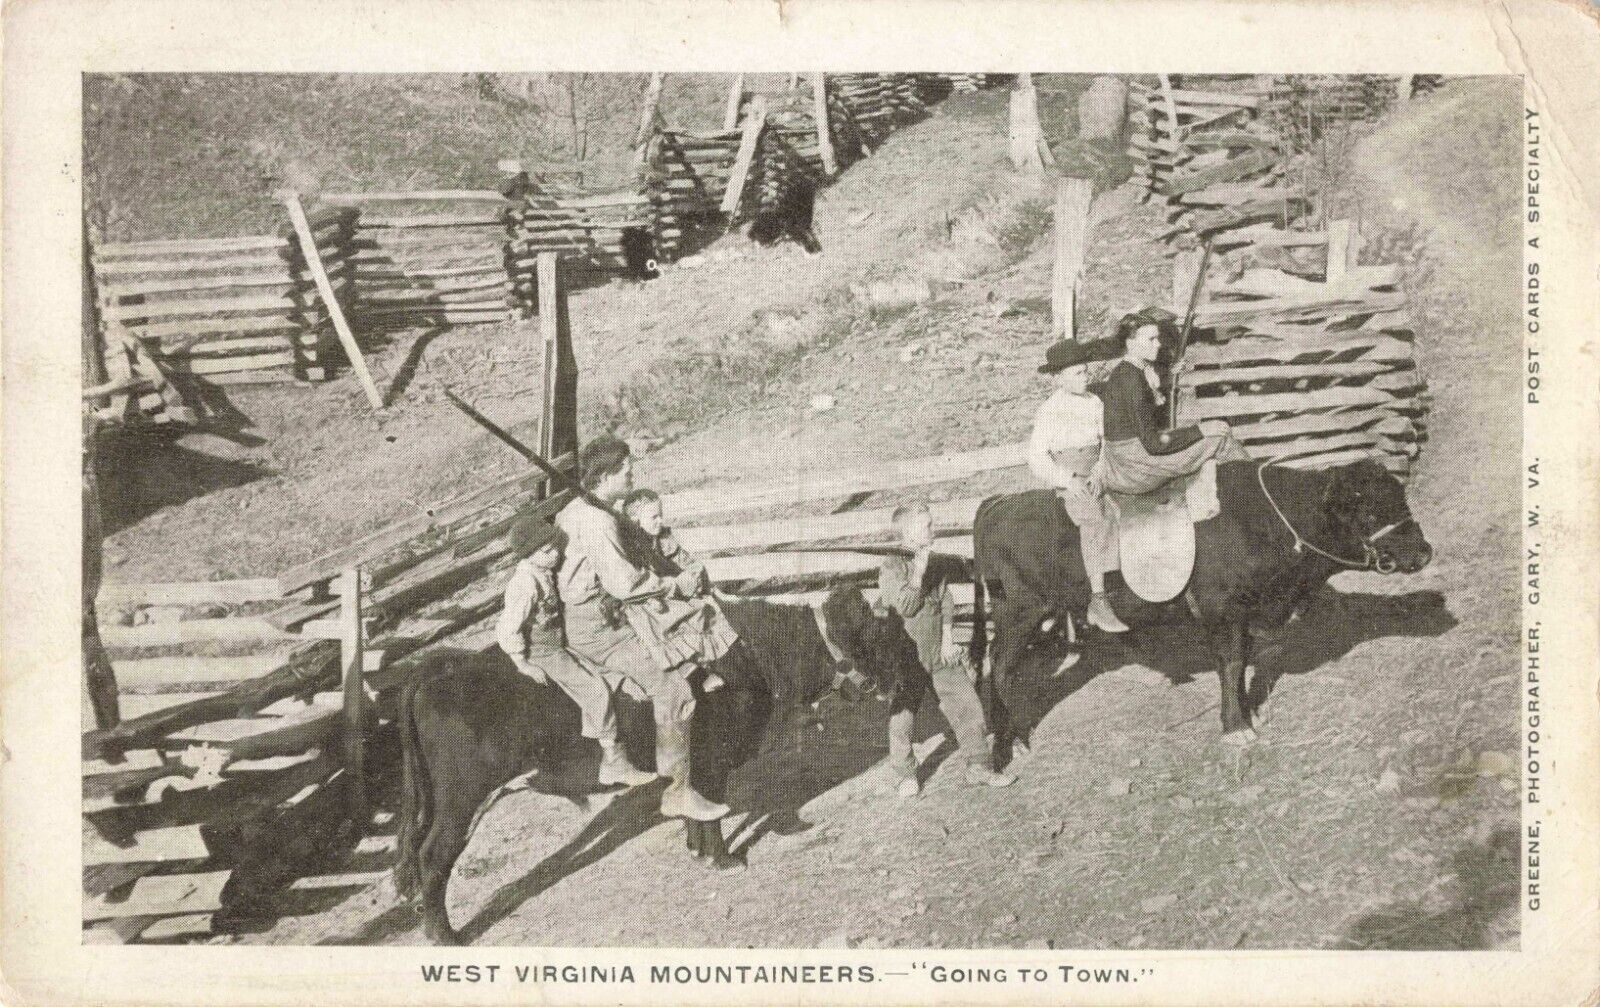 West Virginia Mountaineers Going to Town Gary WV PM Iaeger 1908 Postcard